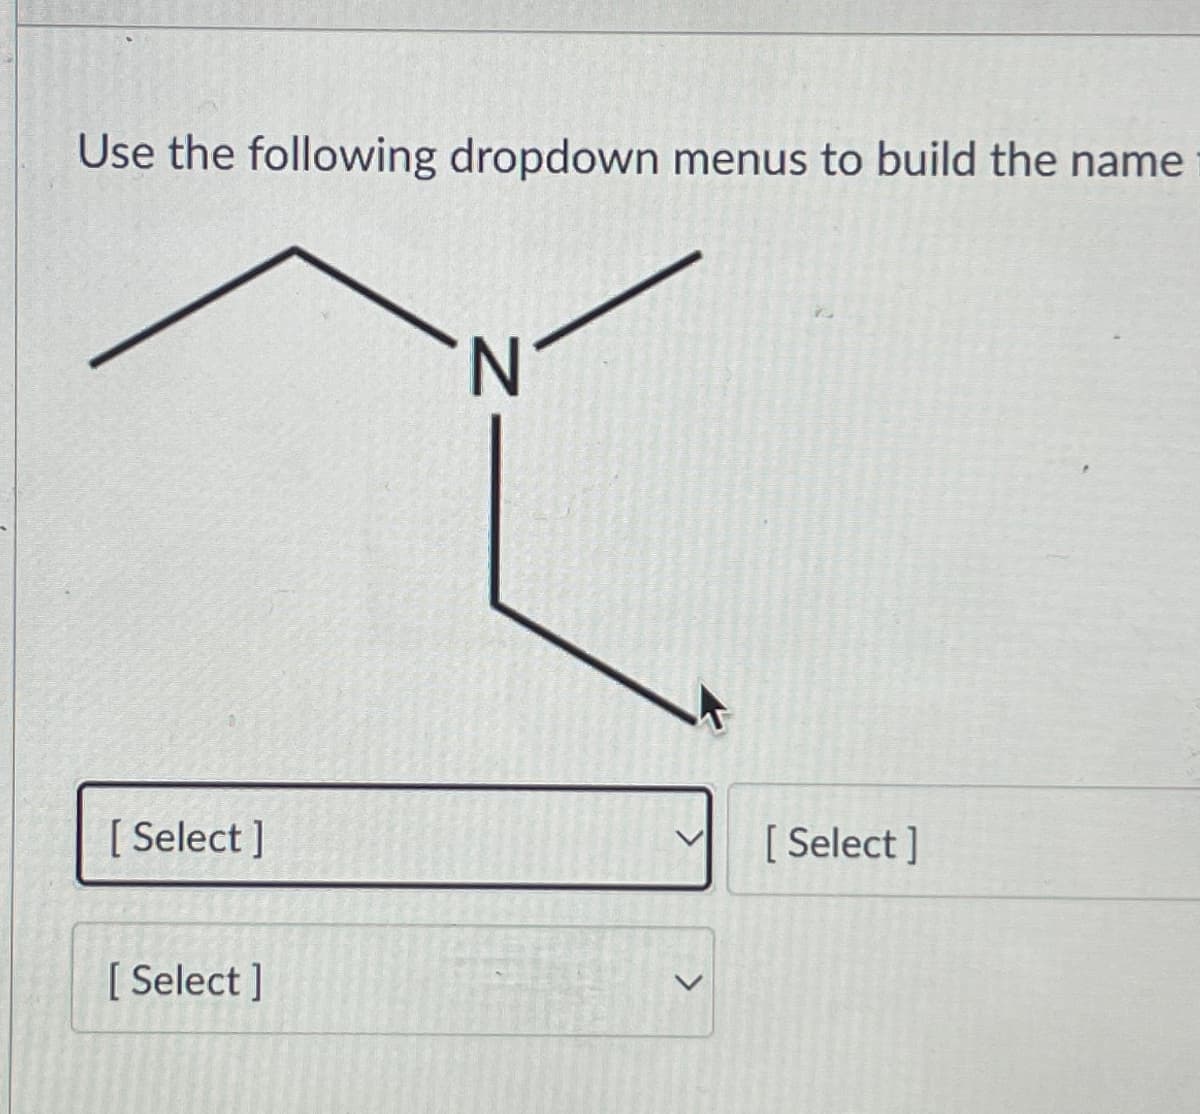 Use the following dropdown menus to build the name
[Select]
[Select]
N
>
[Select]